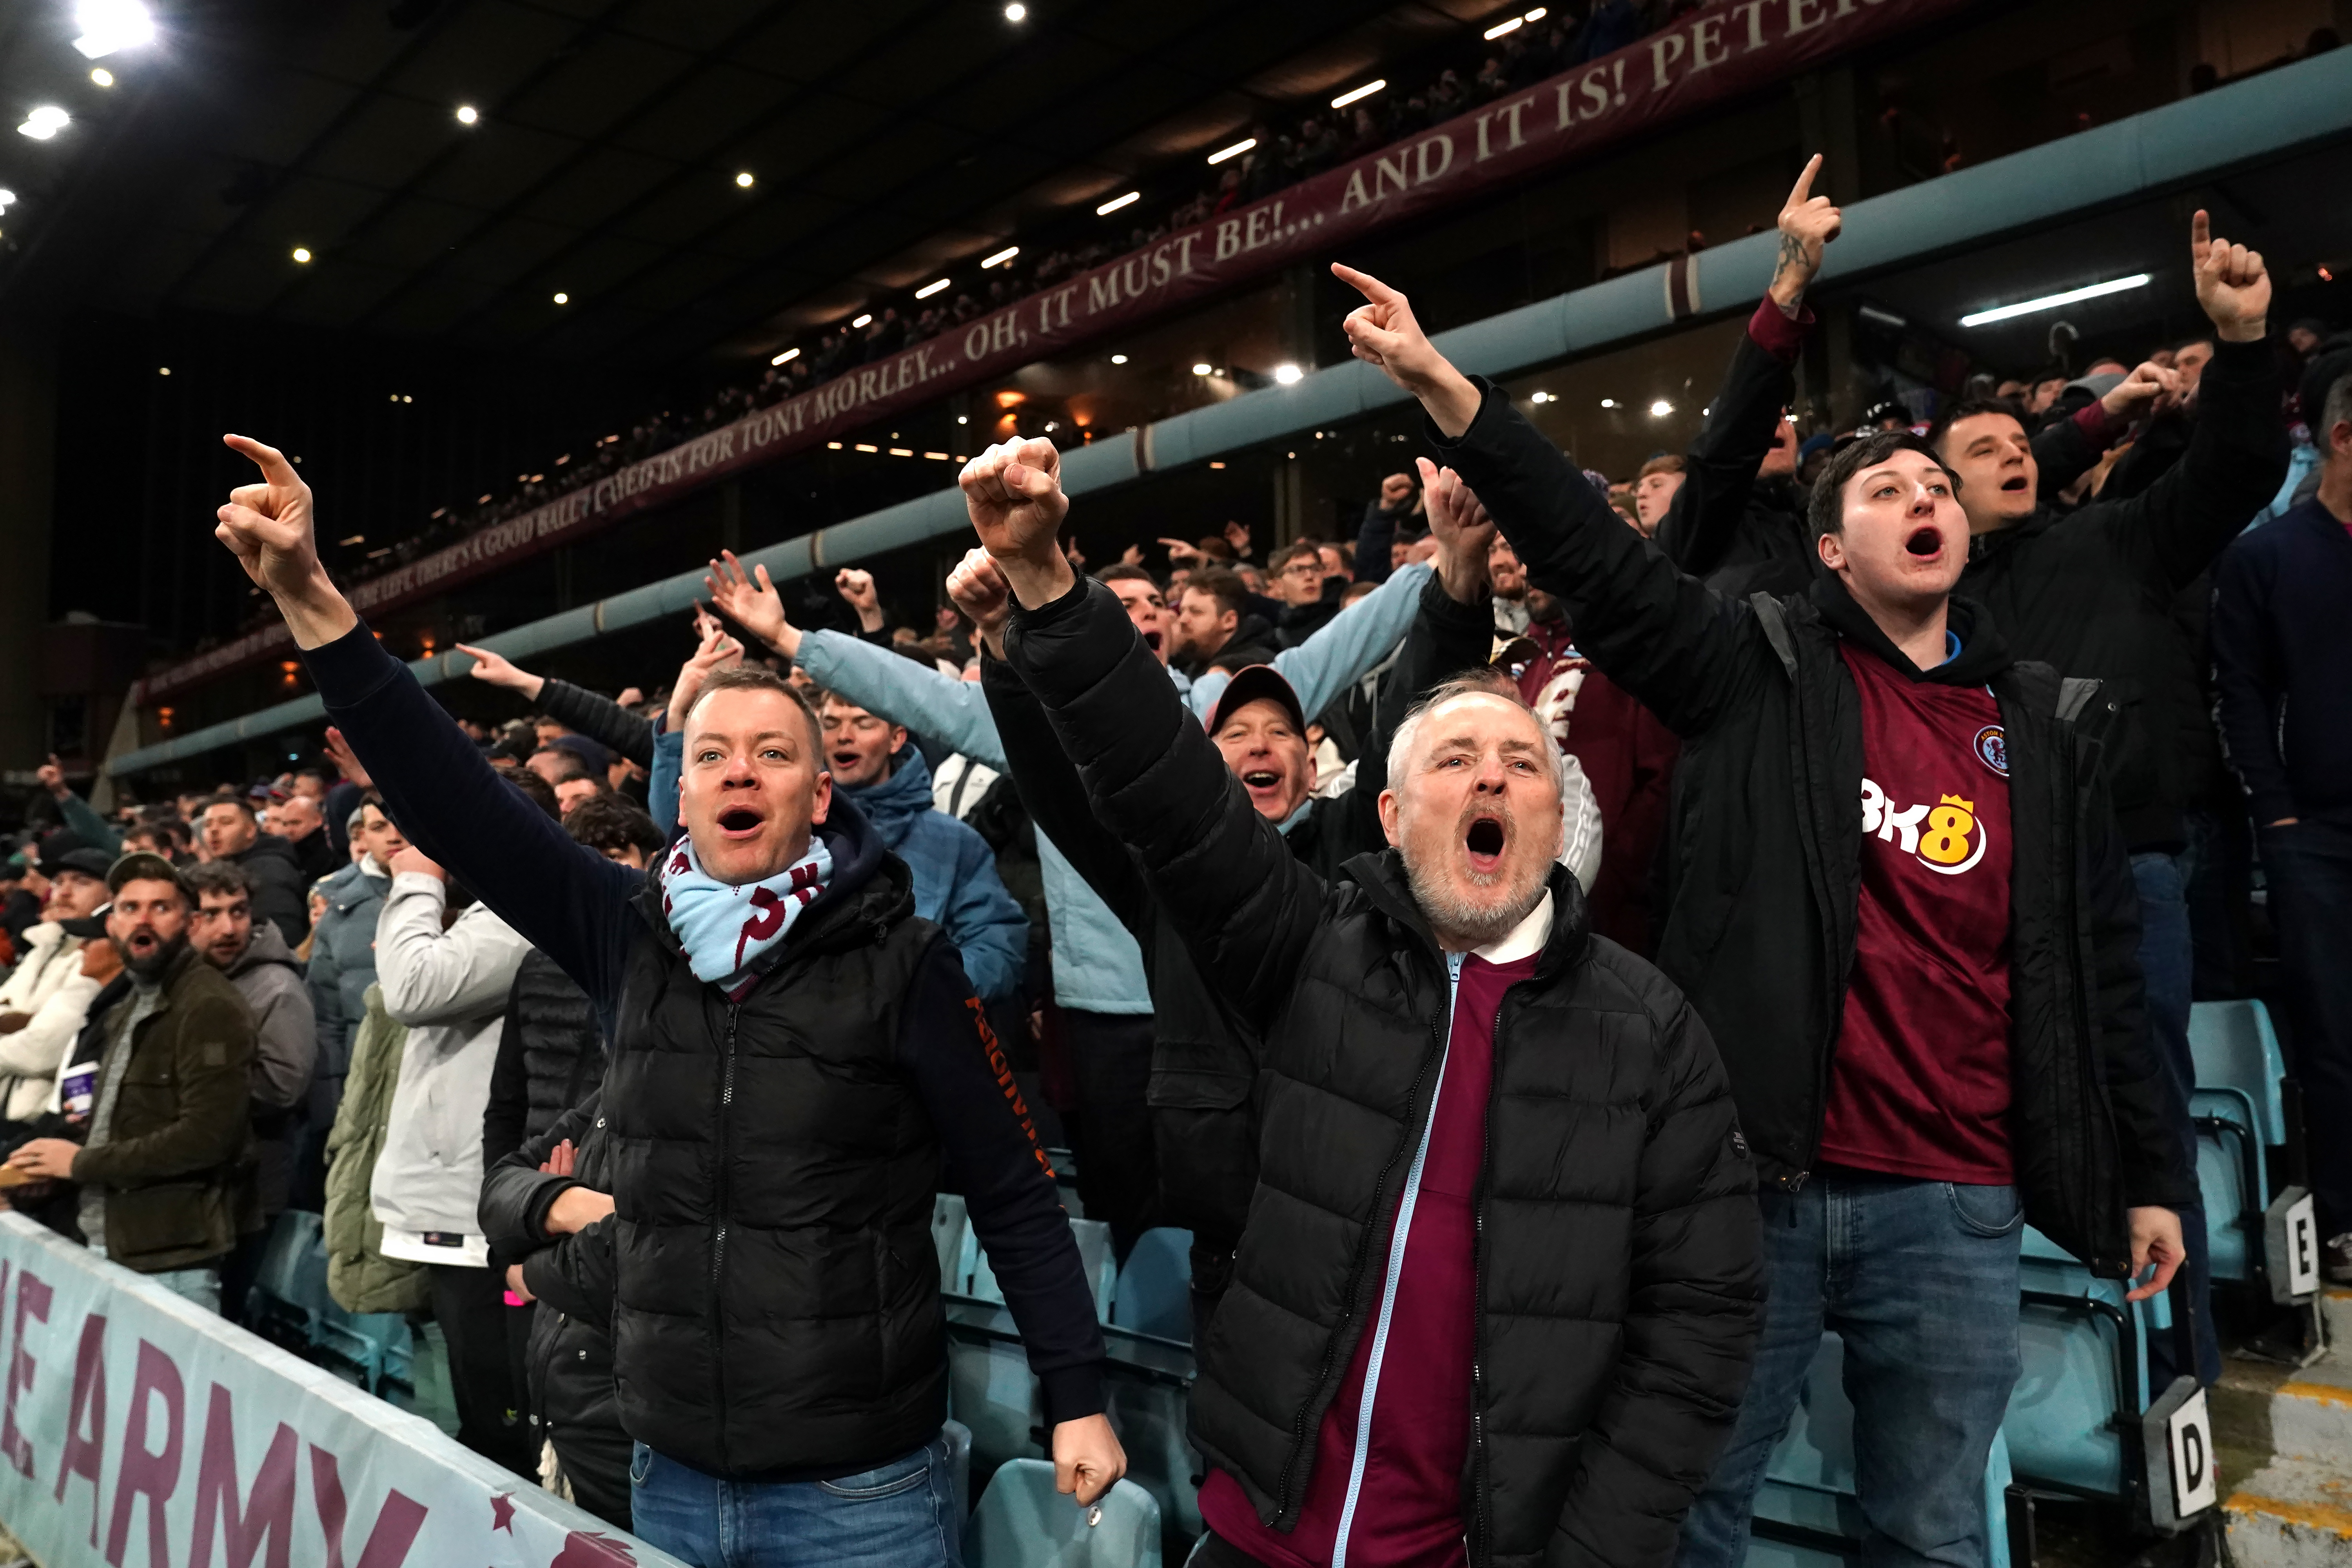 Aston Villa fans have become accustomed to seeing their team win at home